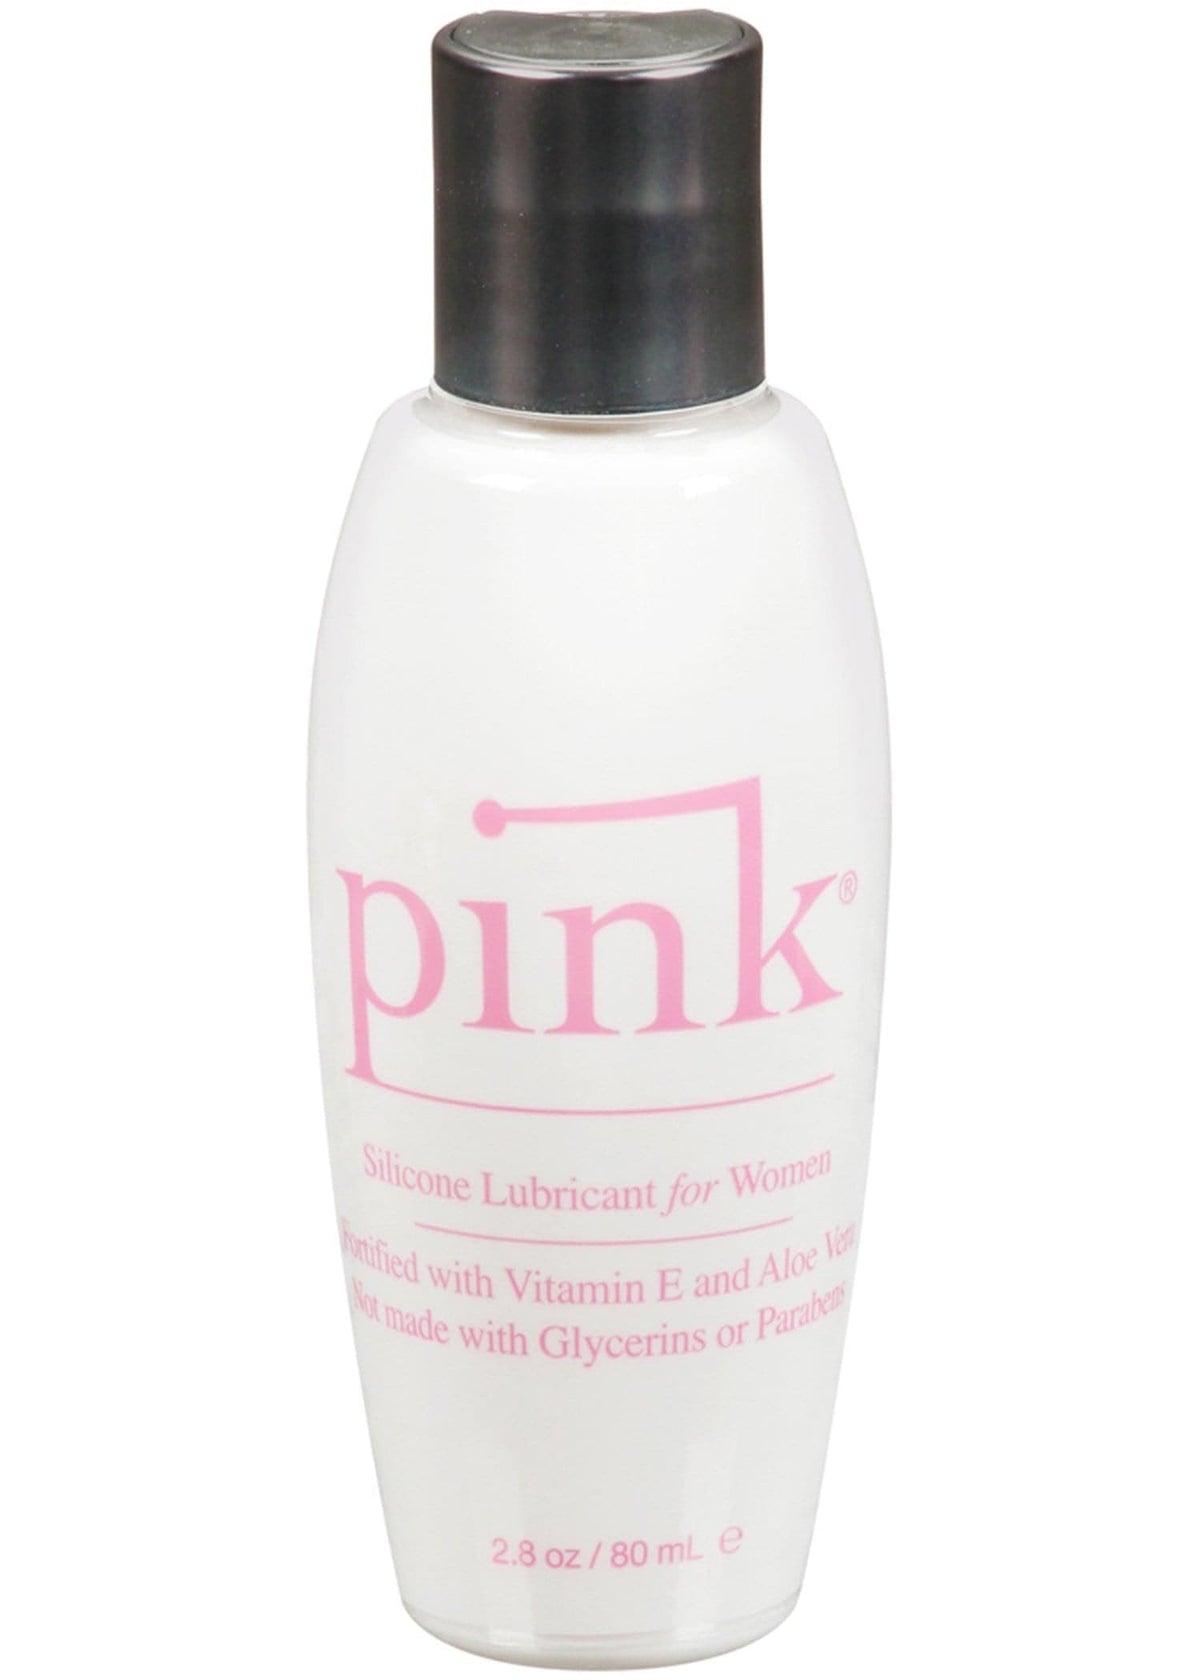 pink silicone lubricant 2 8 oz 80 ml